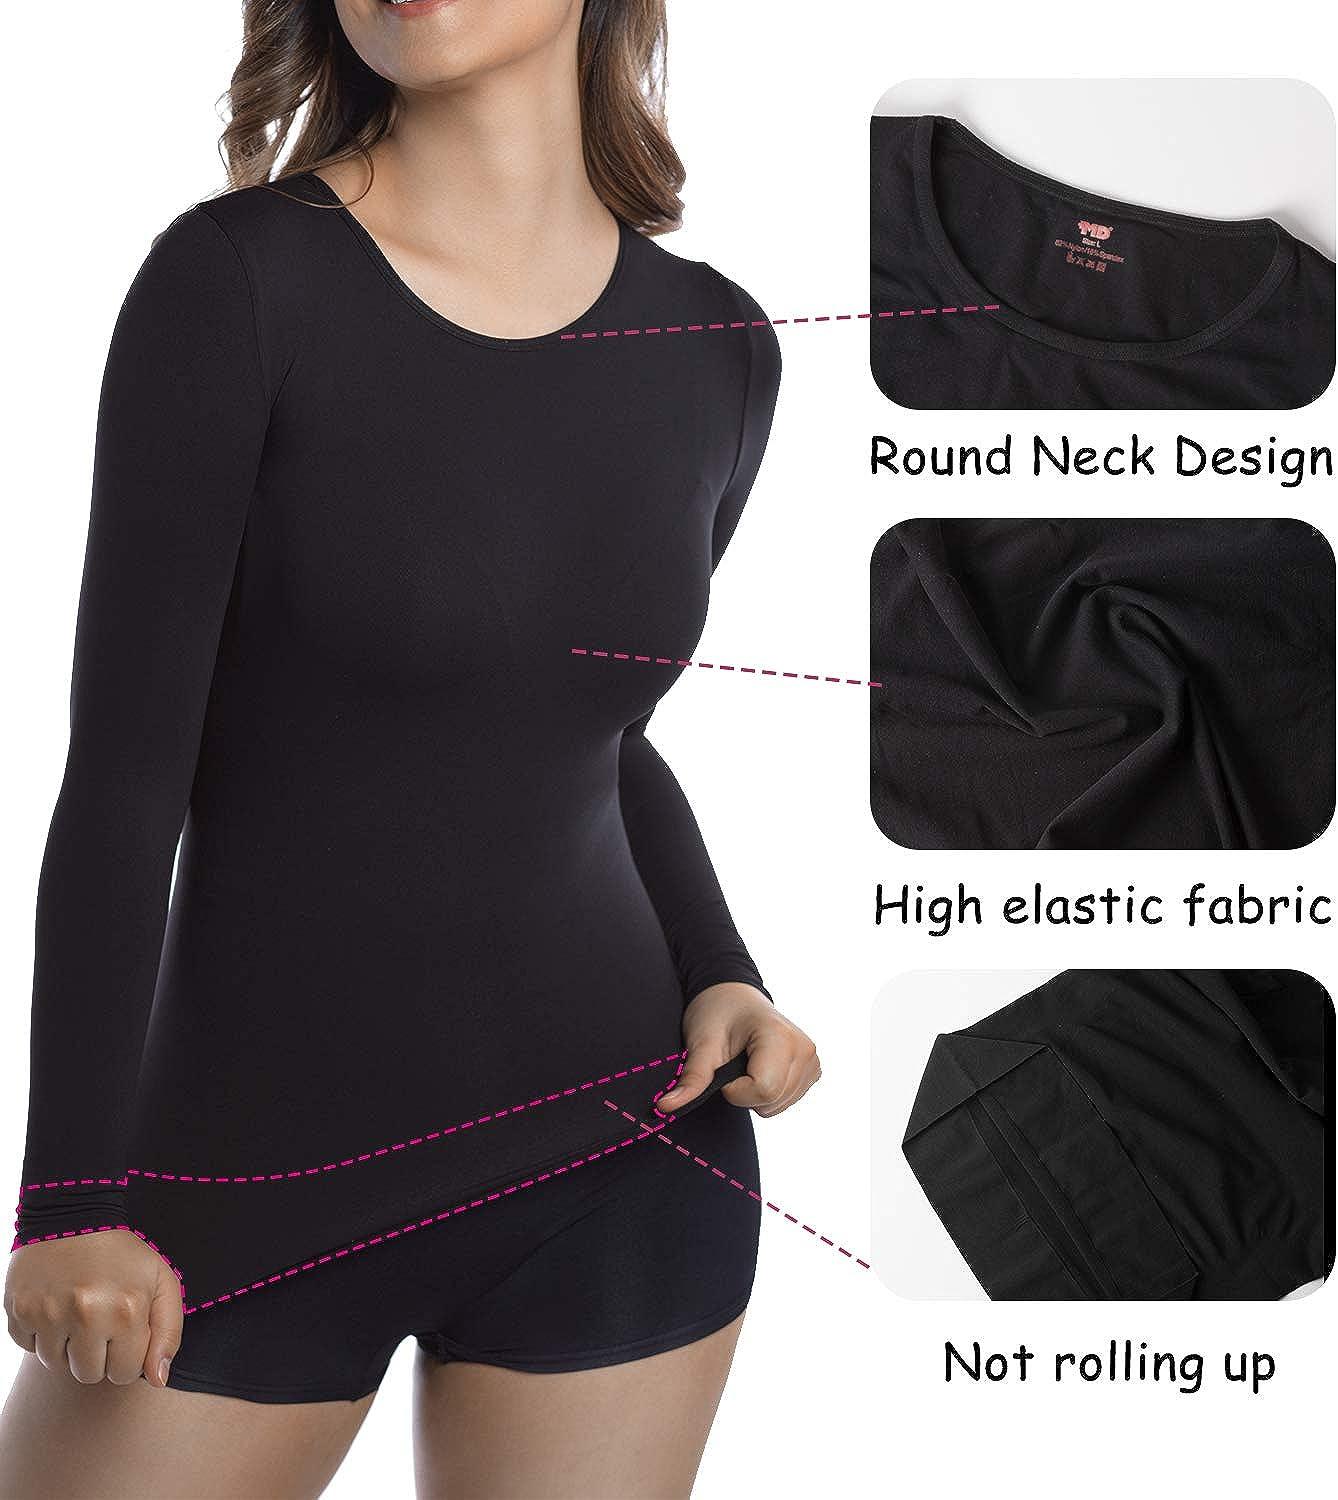 MD Womens Compression Slimming Shirts and Undershirts for Tummy